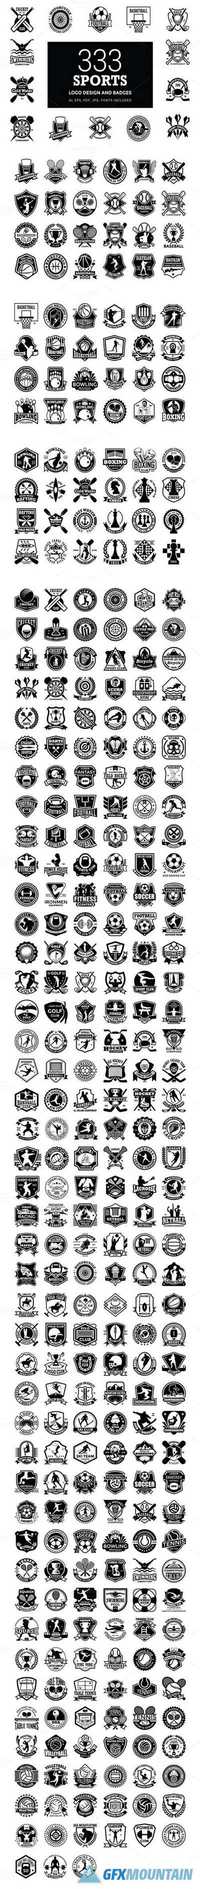 333 Sports Logo Designs and Badges 672400